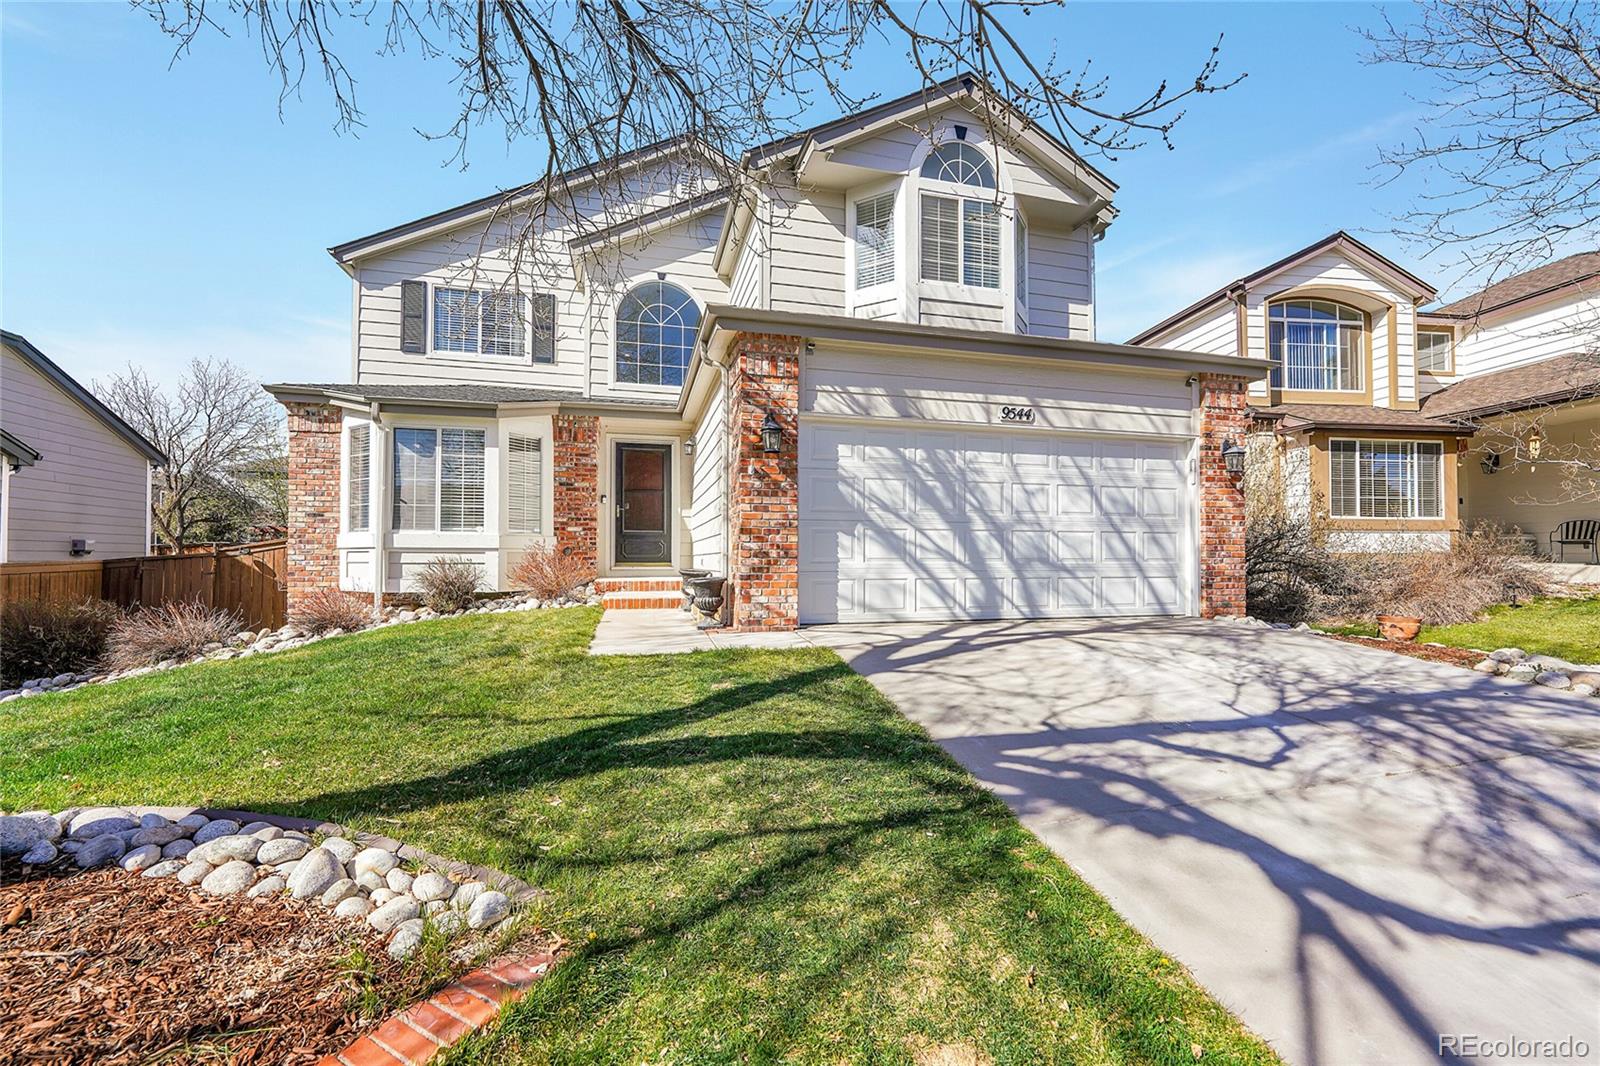 9544  golden eagle place, highlands ranch sold home. Closed on 2024-04-30 for $853,300.